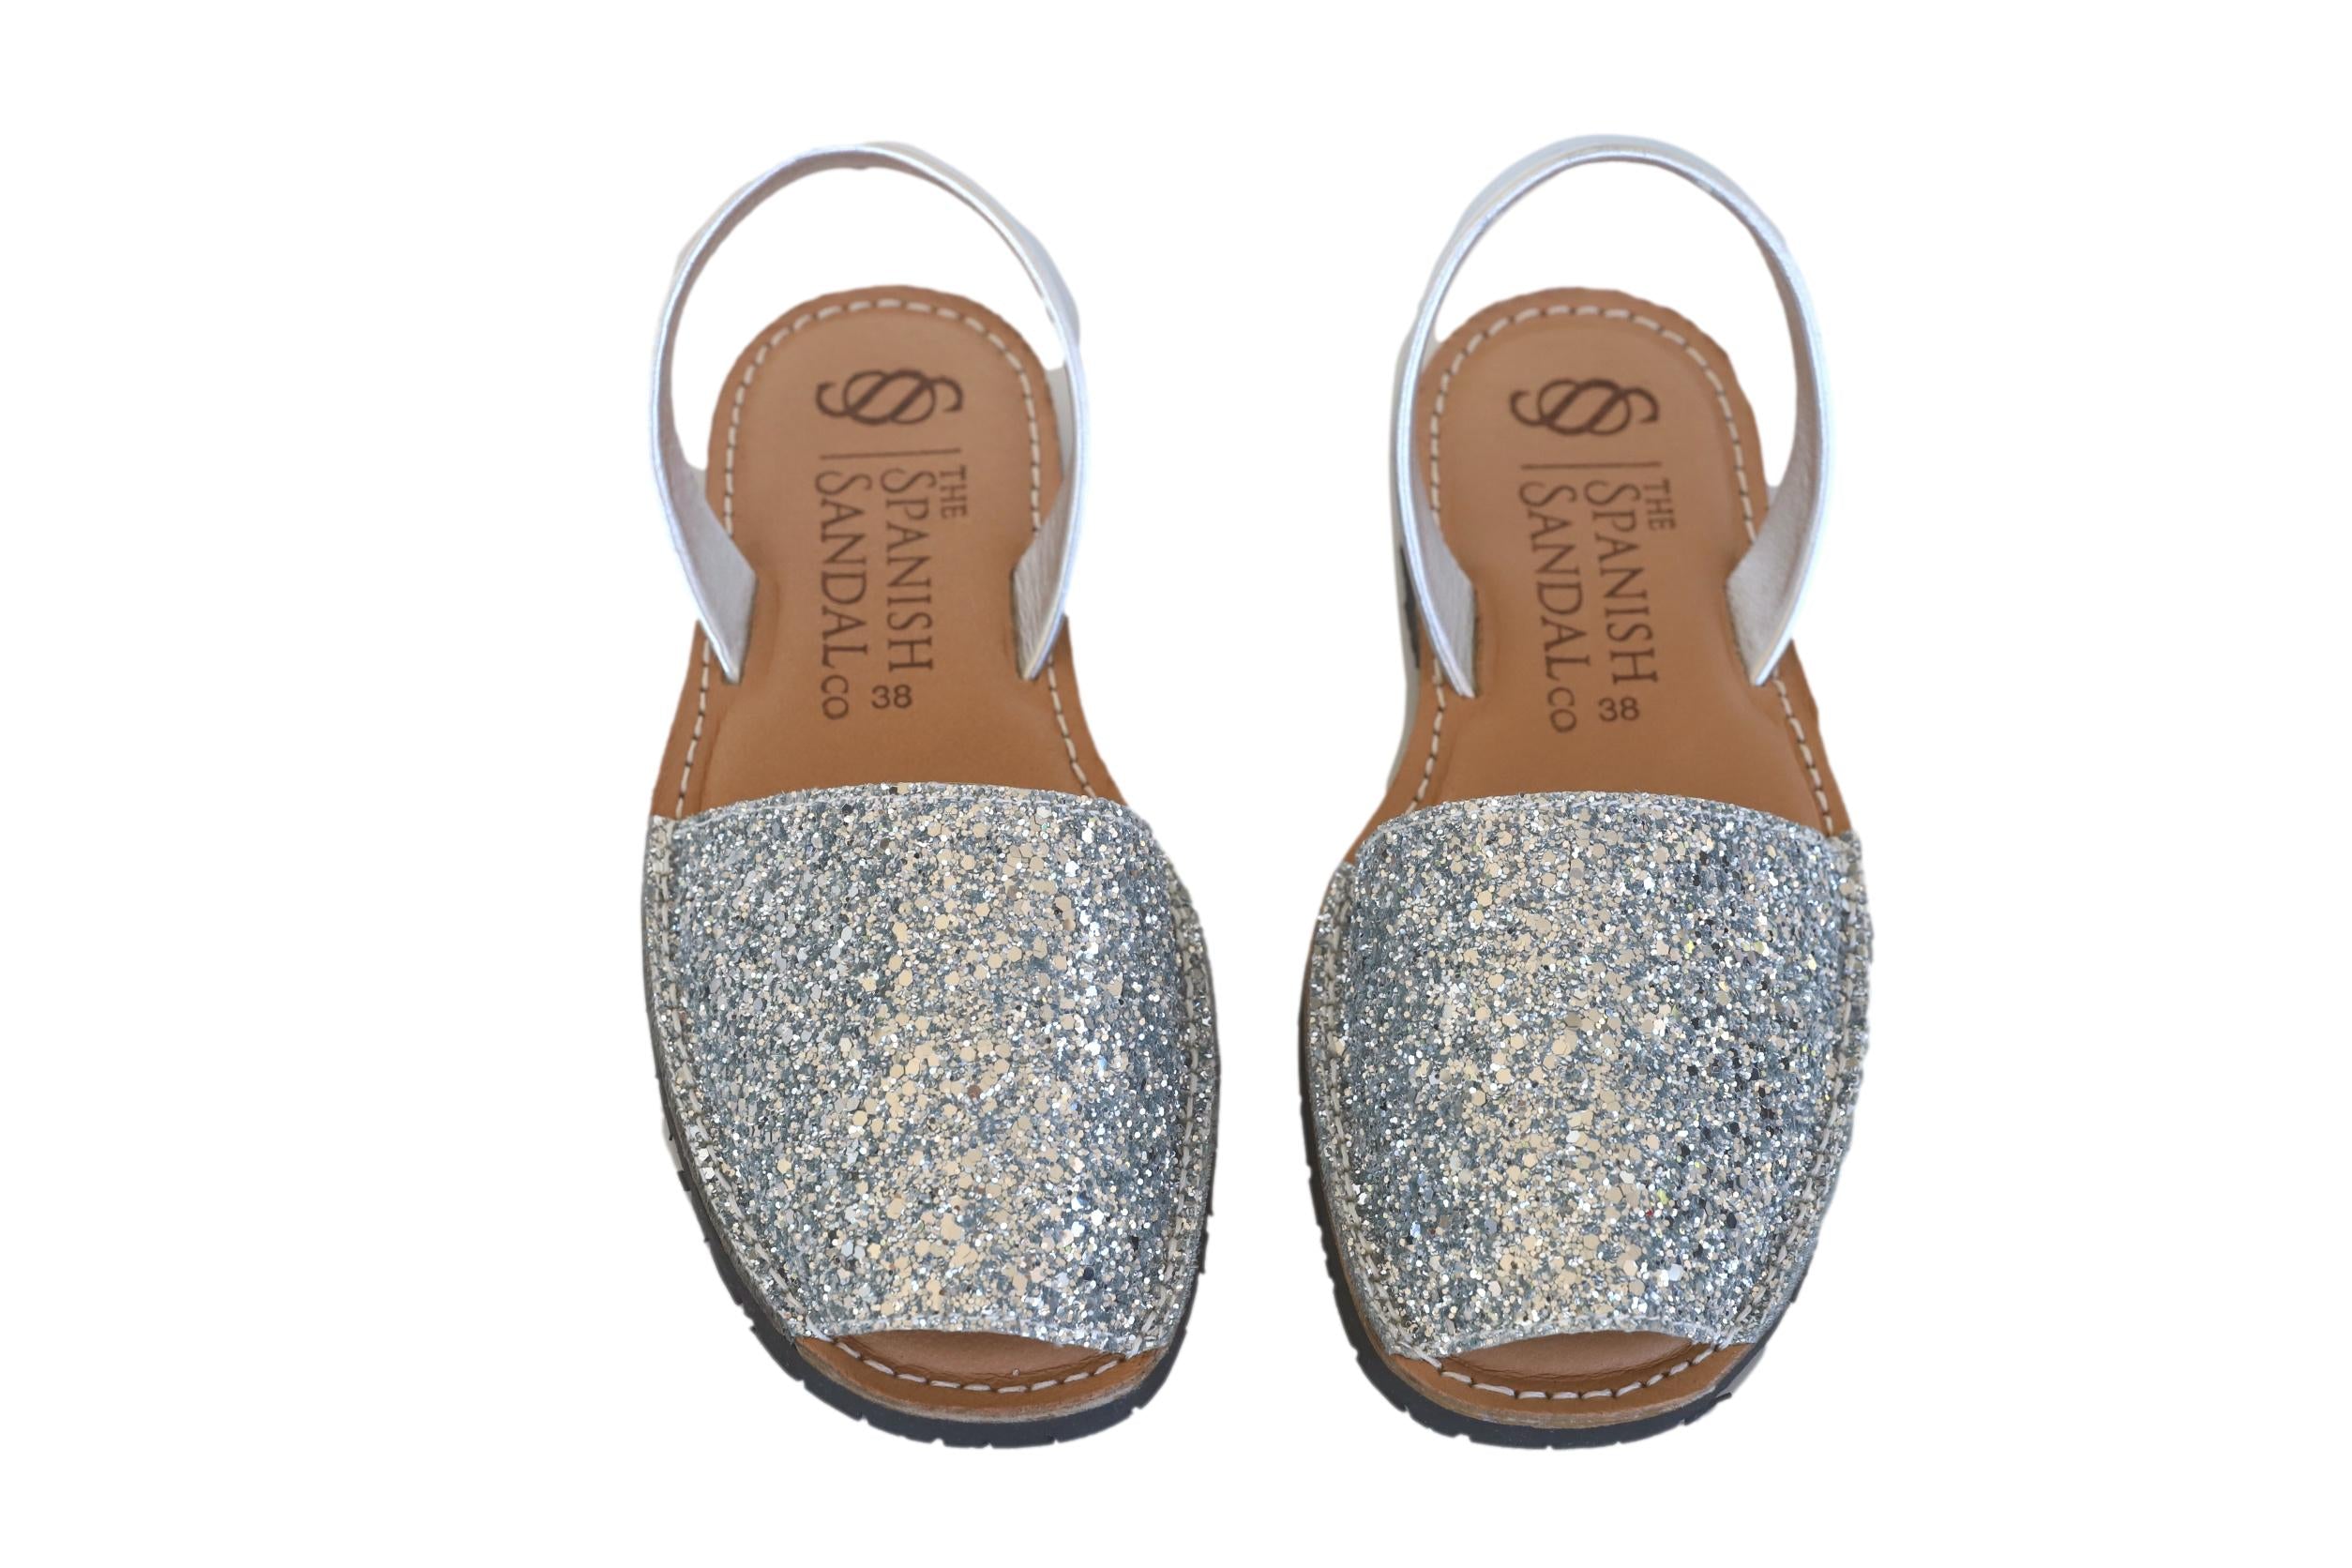 Amazon.com : Rodam Women's Flat Sandals Dressy Glitter Rhinestone Strap  Slip On Sildes Square Summer Open Toe Comfortable Walking Dress Beach Shoes  Fashion Strappy Sparkly Sandals for Women : Sports & Outdoors